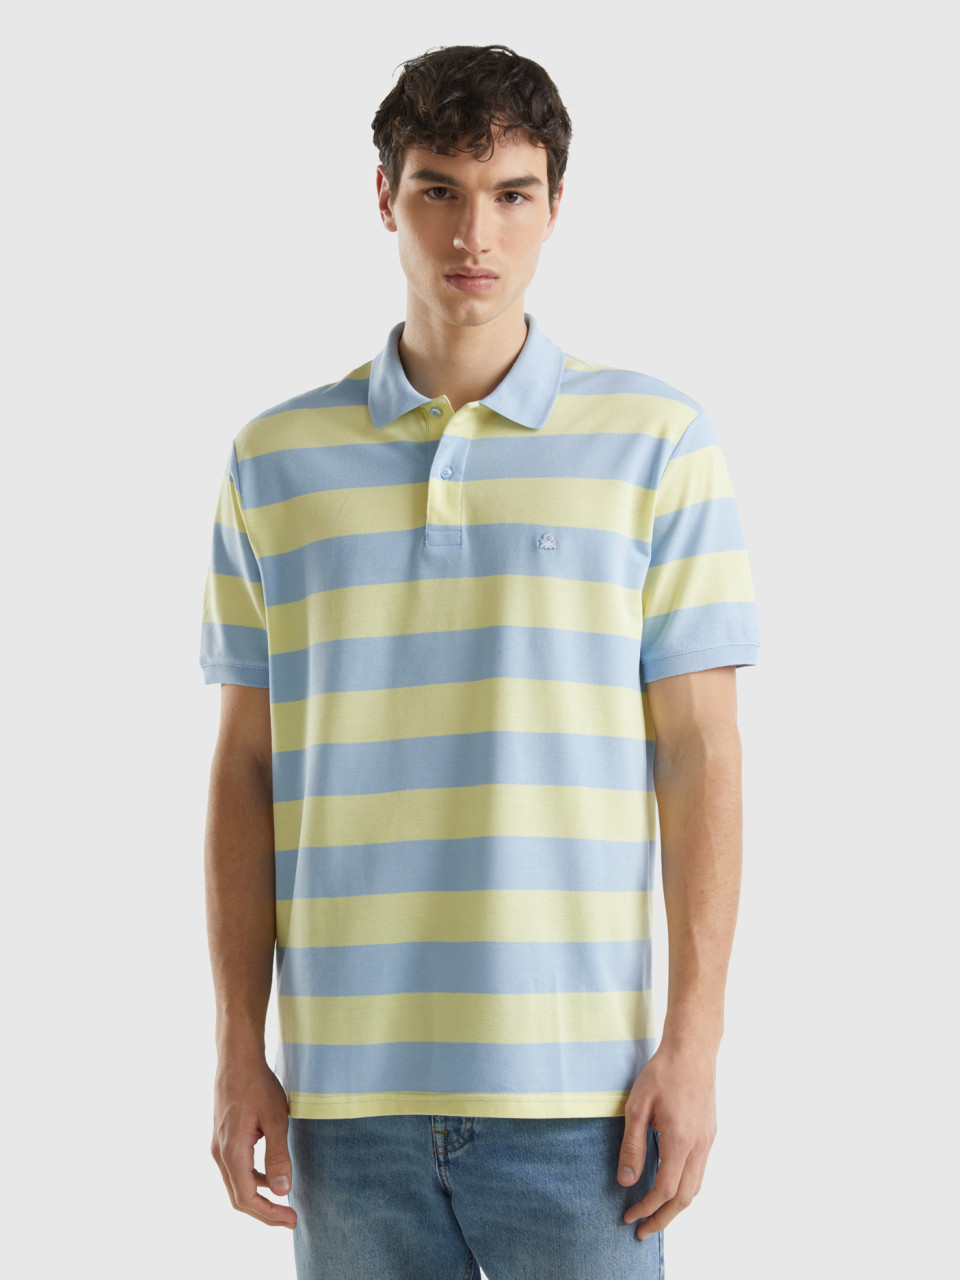 Benetton, Polo With Sky Blue And Light Yellow Stripes, Multi-color, Men